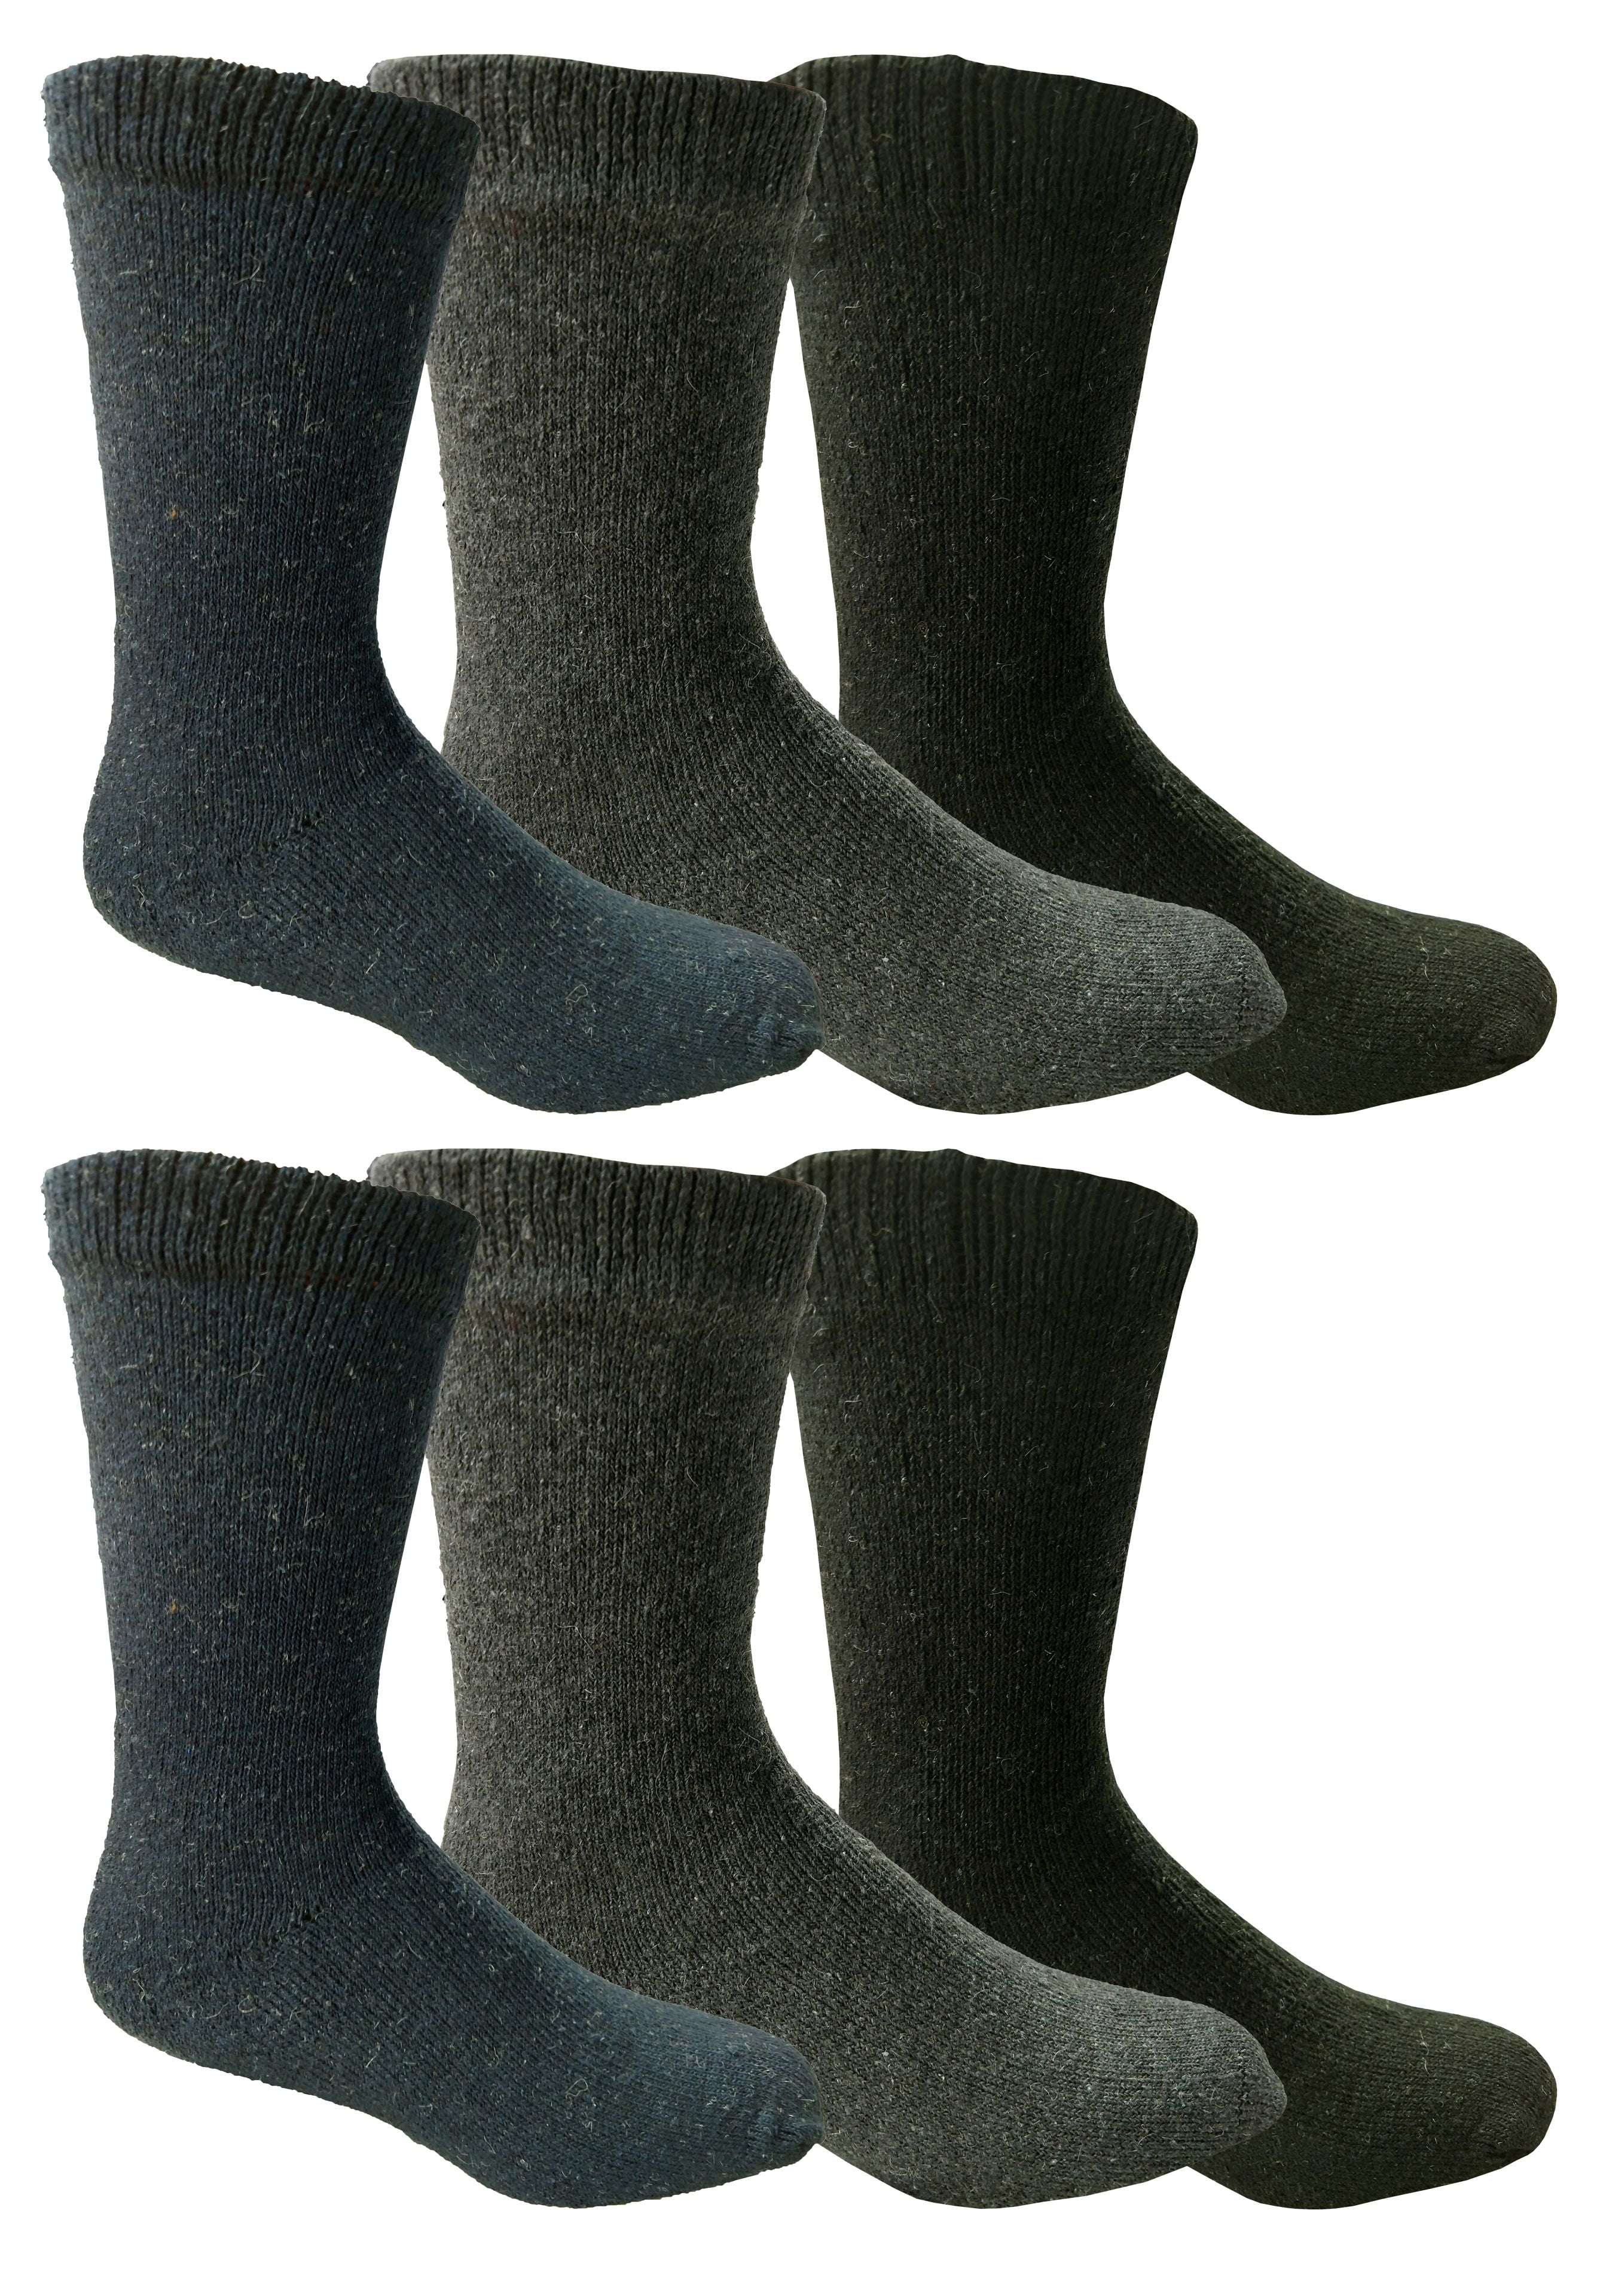 Mens Bed Socks Thermal For Warm Cosy Feet Brushed Warmth Size 6-11 